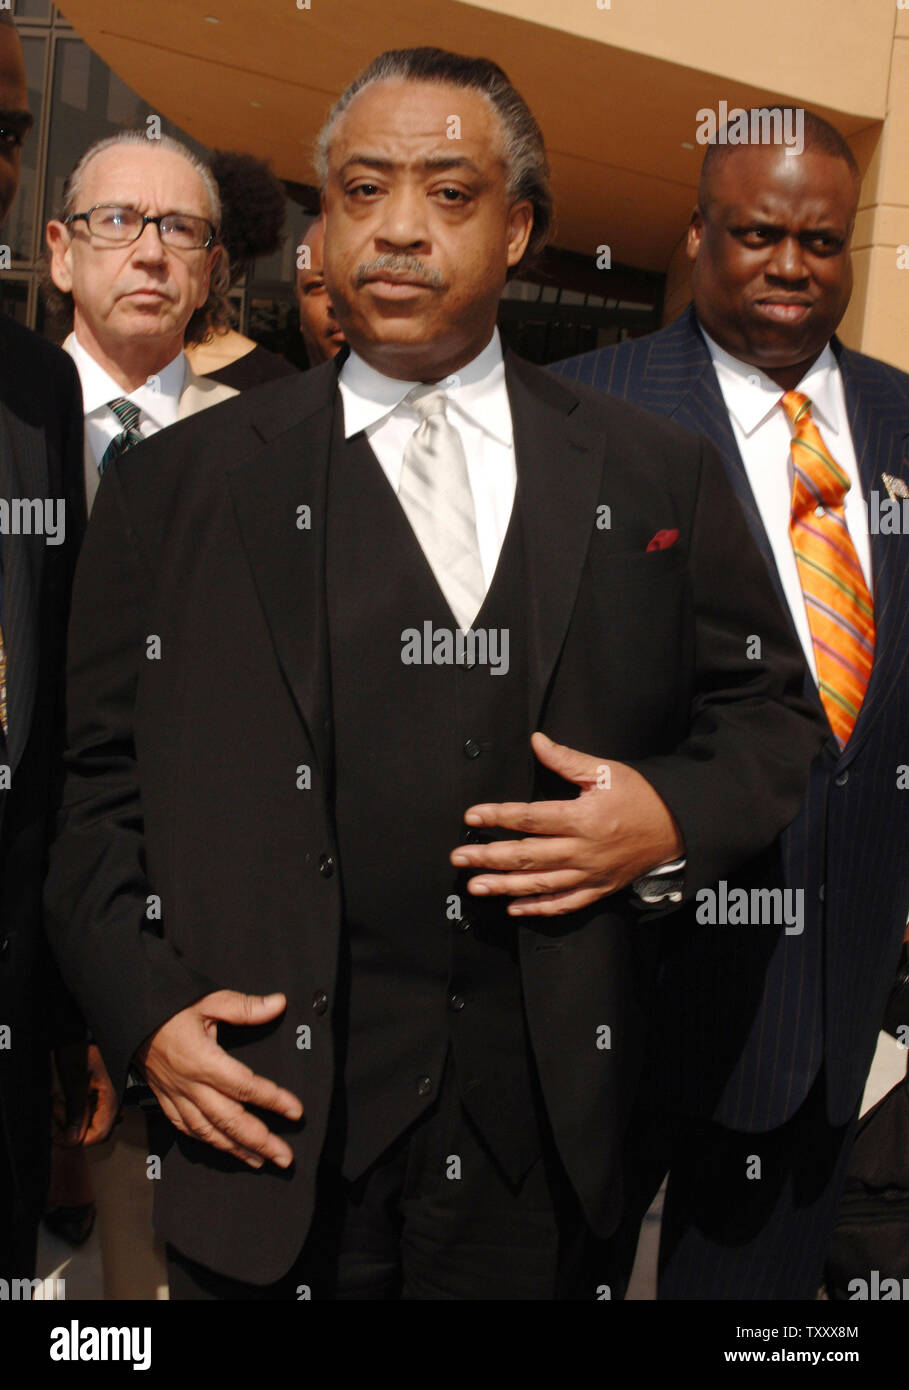 Reverened Al Sharpton talks with reporters as he arrives for the funeral of attorney Johnnie Cochran in Los Angeles, April 6, 2005. Cochran died from a brain tumor on March 29 at his Los Angeles home, and his best known for his work on civil rights cases as well as representing O.J. Simpson in Simpso's 1995 murder trial in which he was acquitted of the murders of his former wife Nicole Brown Simpson and her friend, Ronald Goldman.  (UPI Photo/Jim Ruymen) Stock Photo